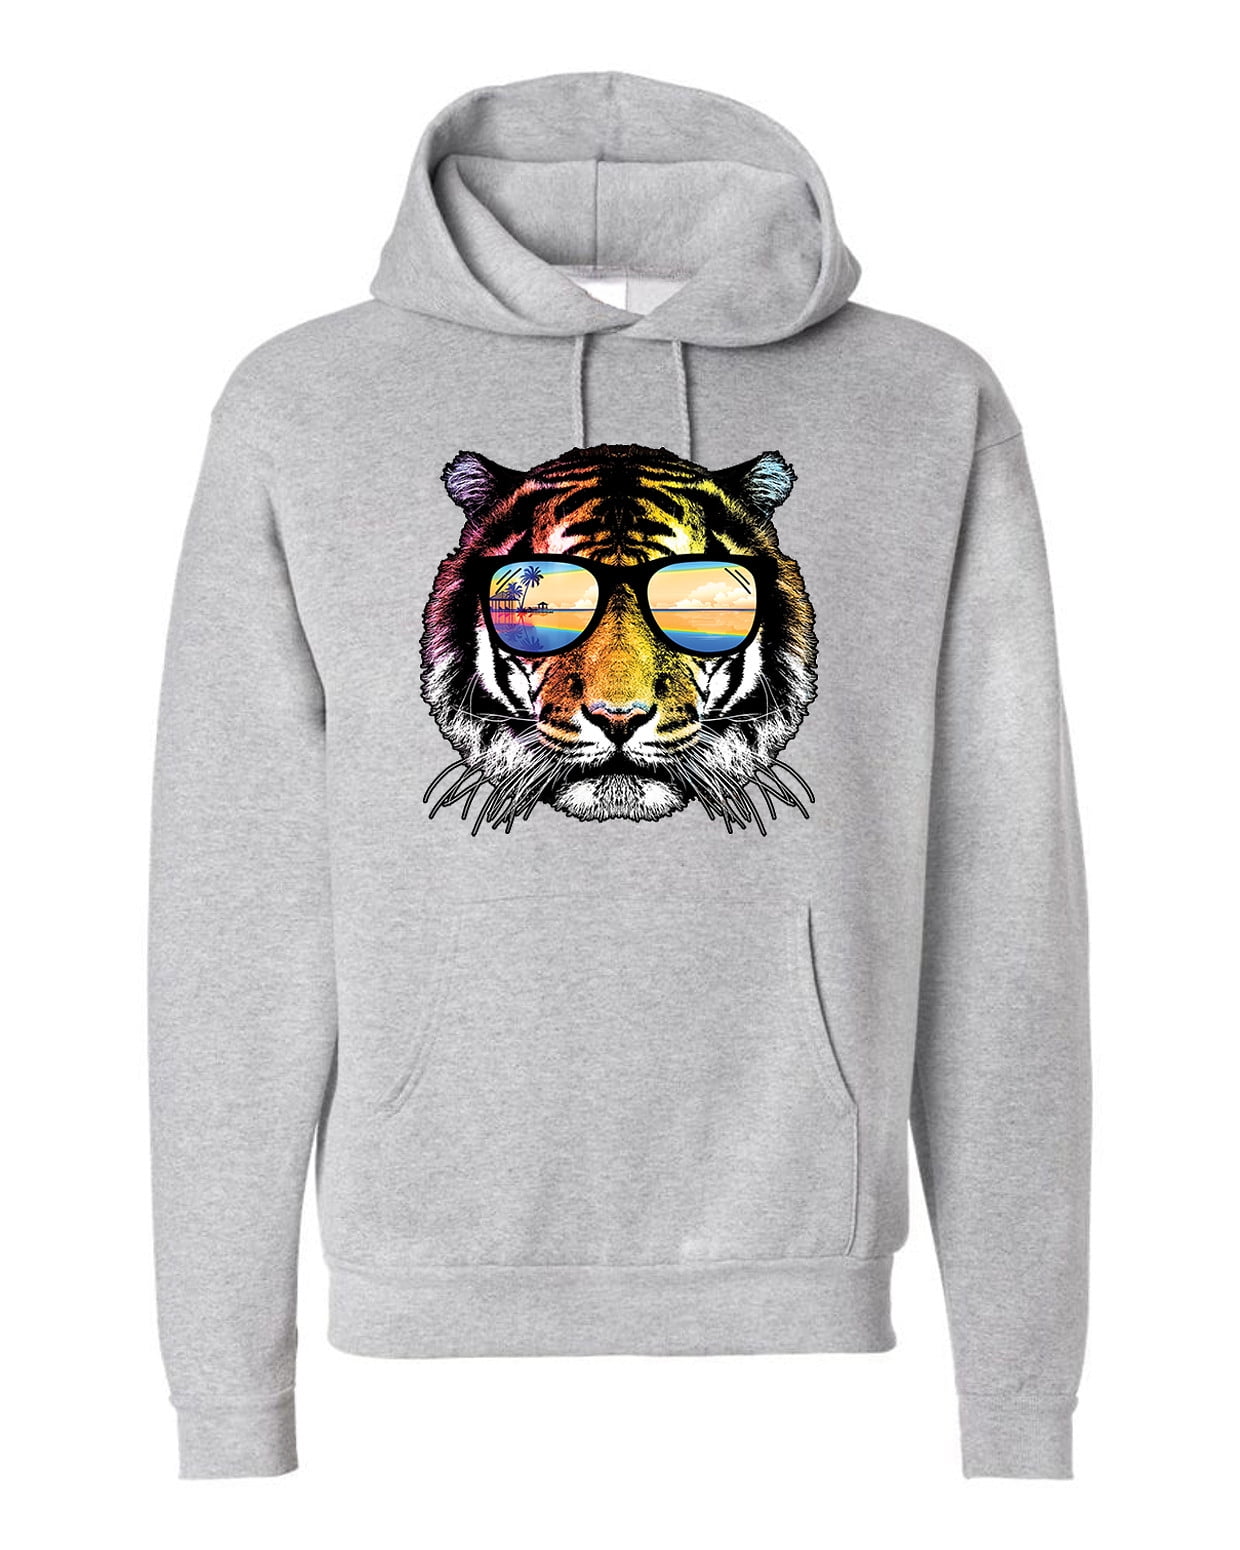 Koyotee - Men's Summer Tiger Gray Pullover Hoodie Sweater 3X-Large Gray ...